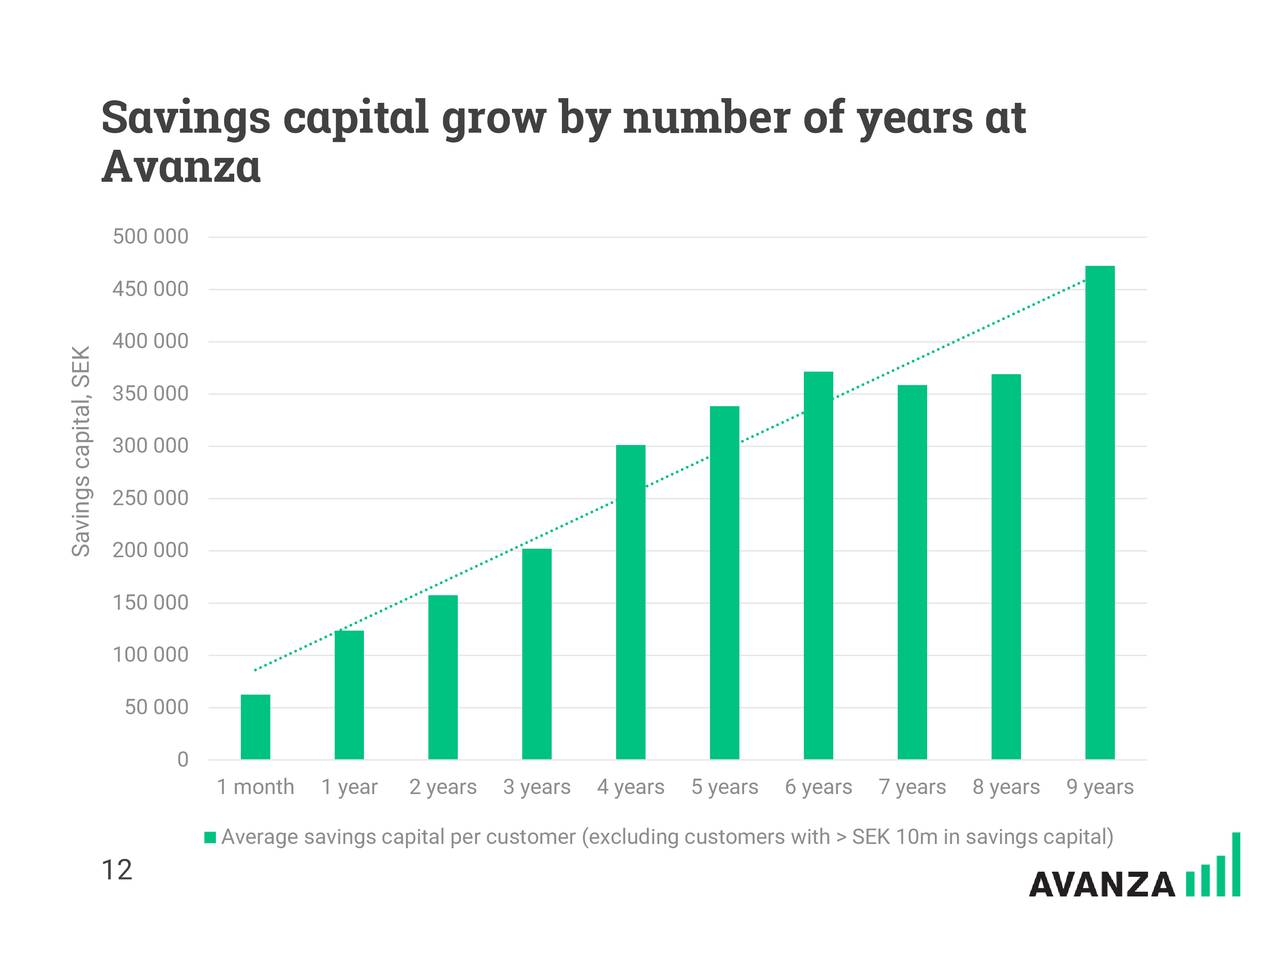 Savings capital grow by number of years at